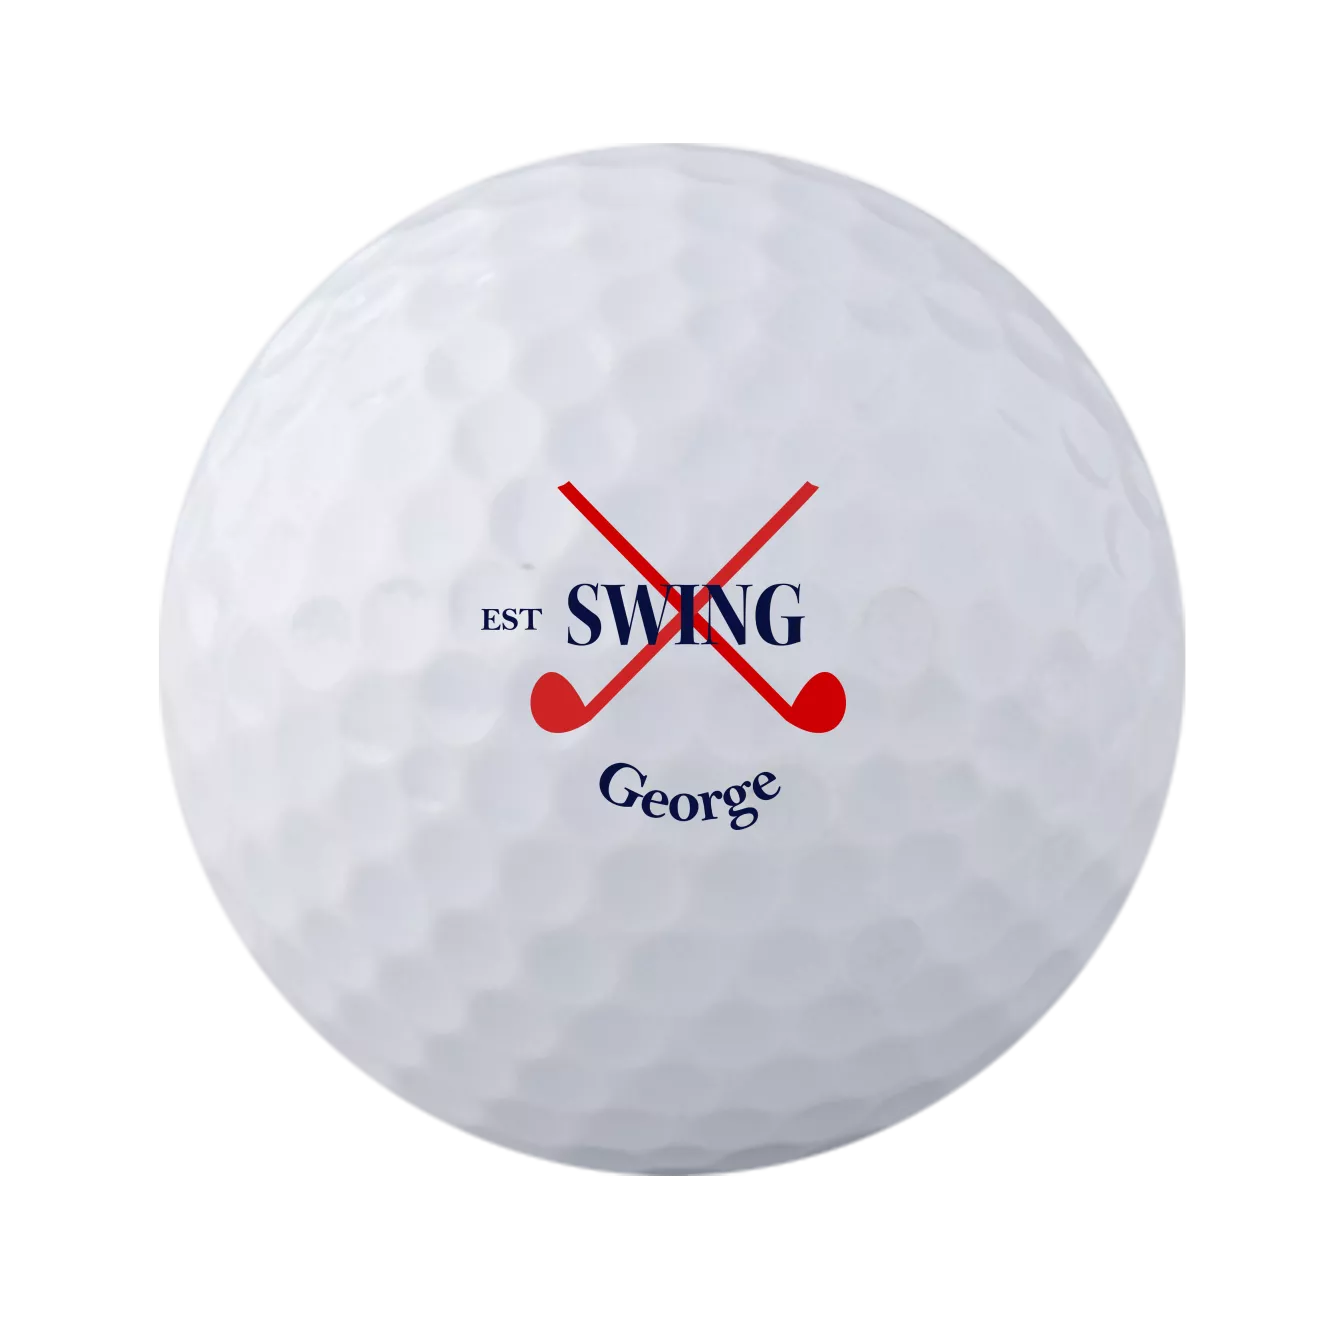 Funny Golf Ball, Personalized Golf Ball, Color Printed Golf Balls,  Christmas Gift, Golf Gifts for Men, Guy Gift, Funny Gift for Man